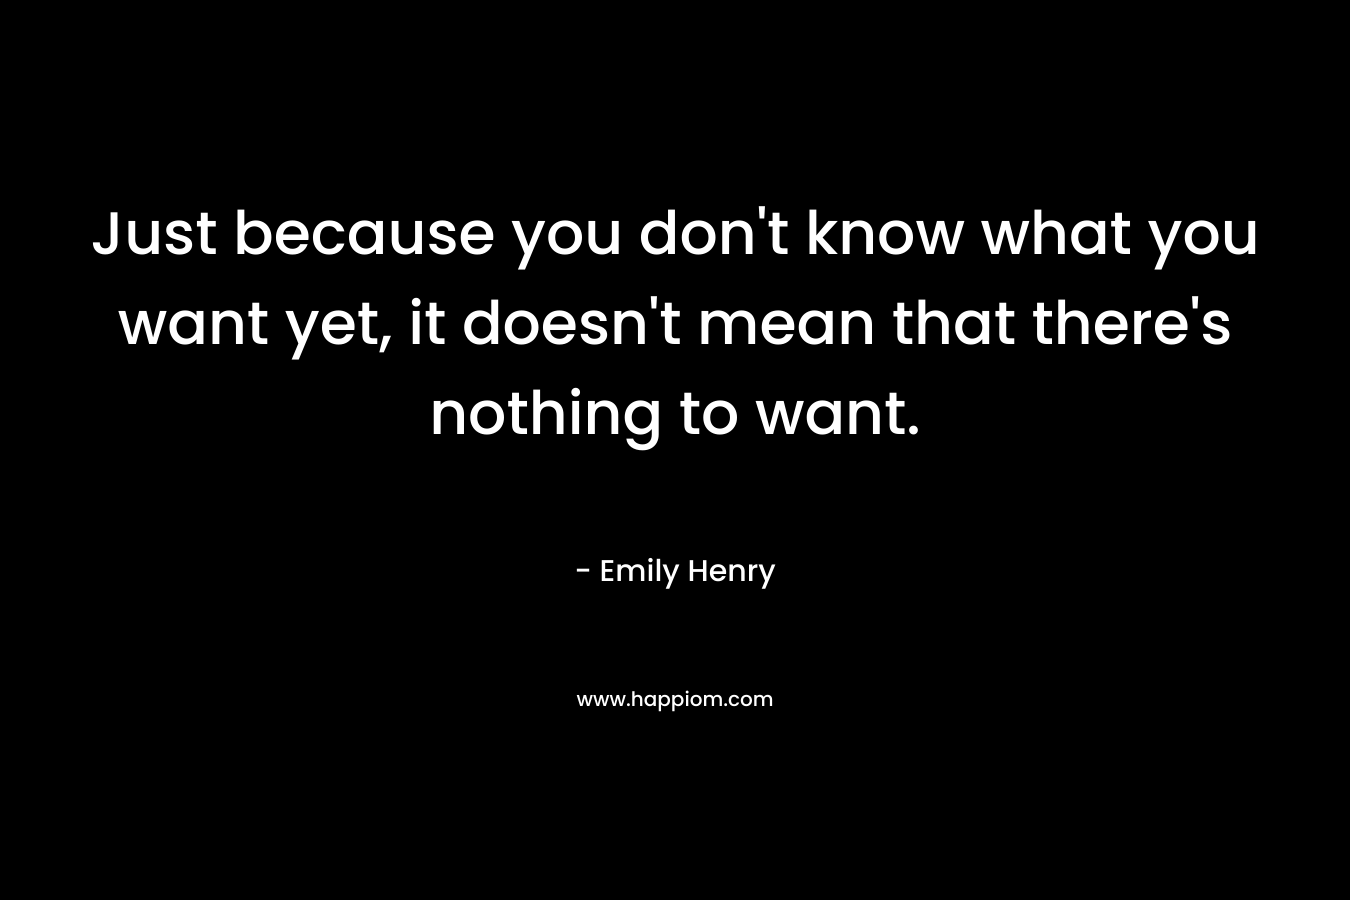 Just because you don’t know what you want yet, it doesn’t mean that there’s nothing to want. – Emily Henry